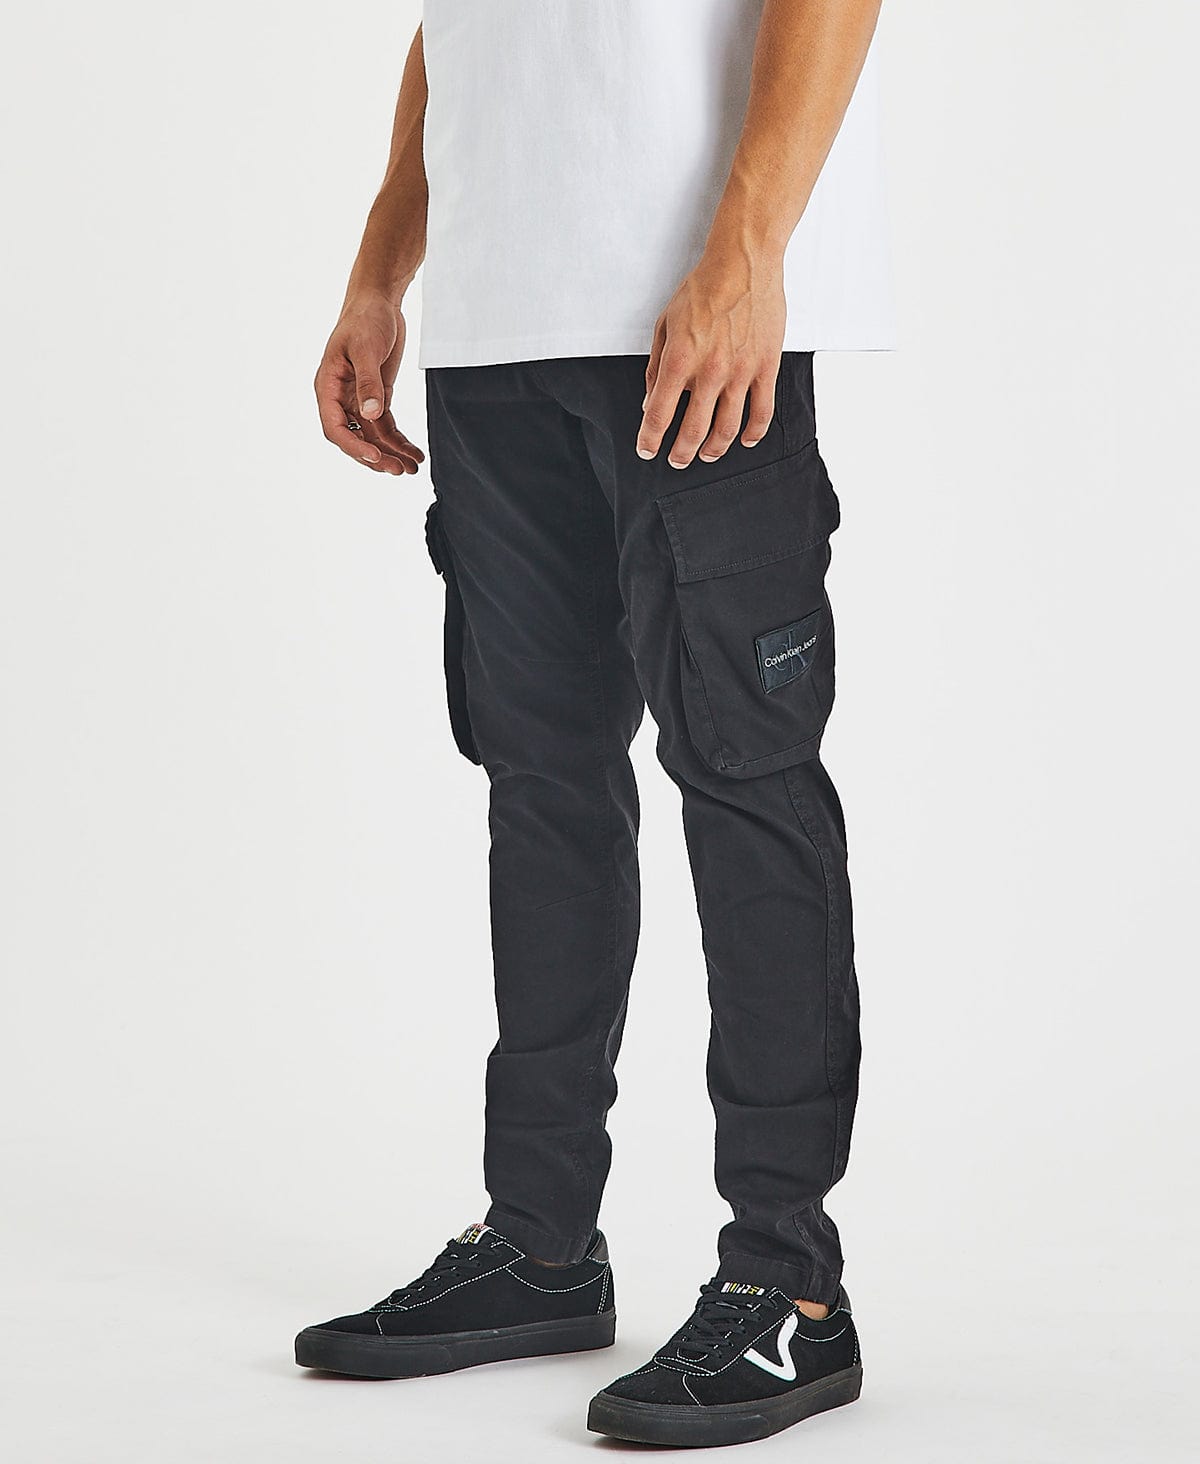 Buy Men Trousers & Pants Online in India - Up to 75% OFF